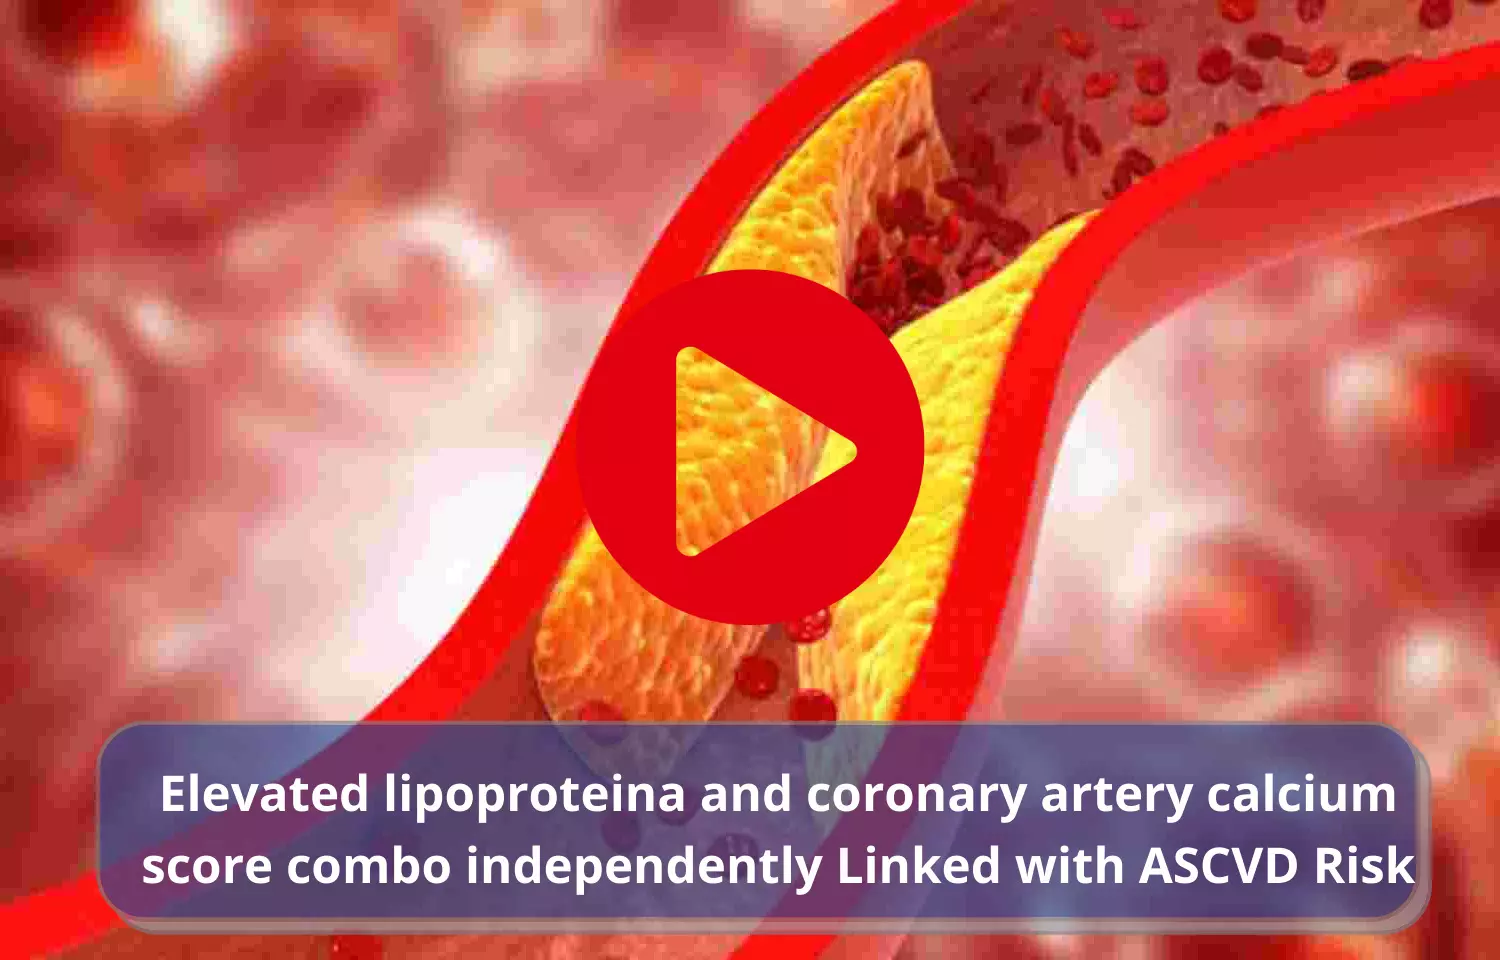 Elevated lipoproteins and coronary artery calcium score combo independently Linked with ASCVD Risk